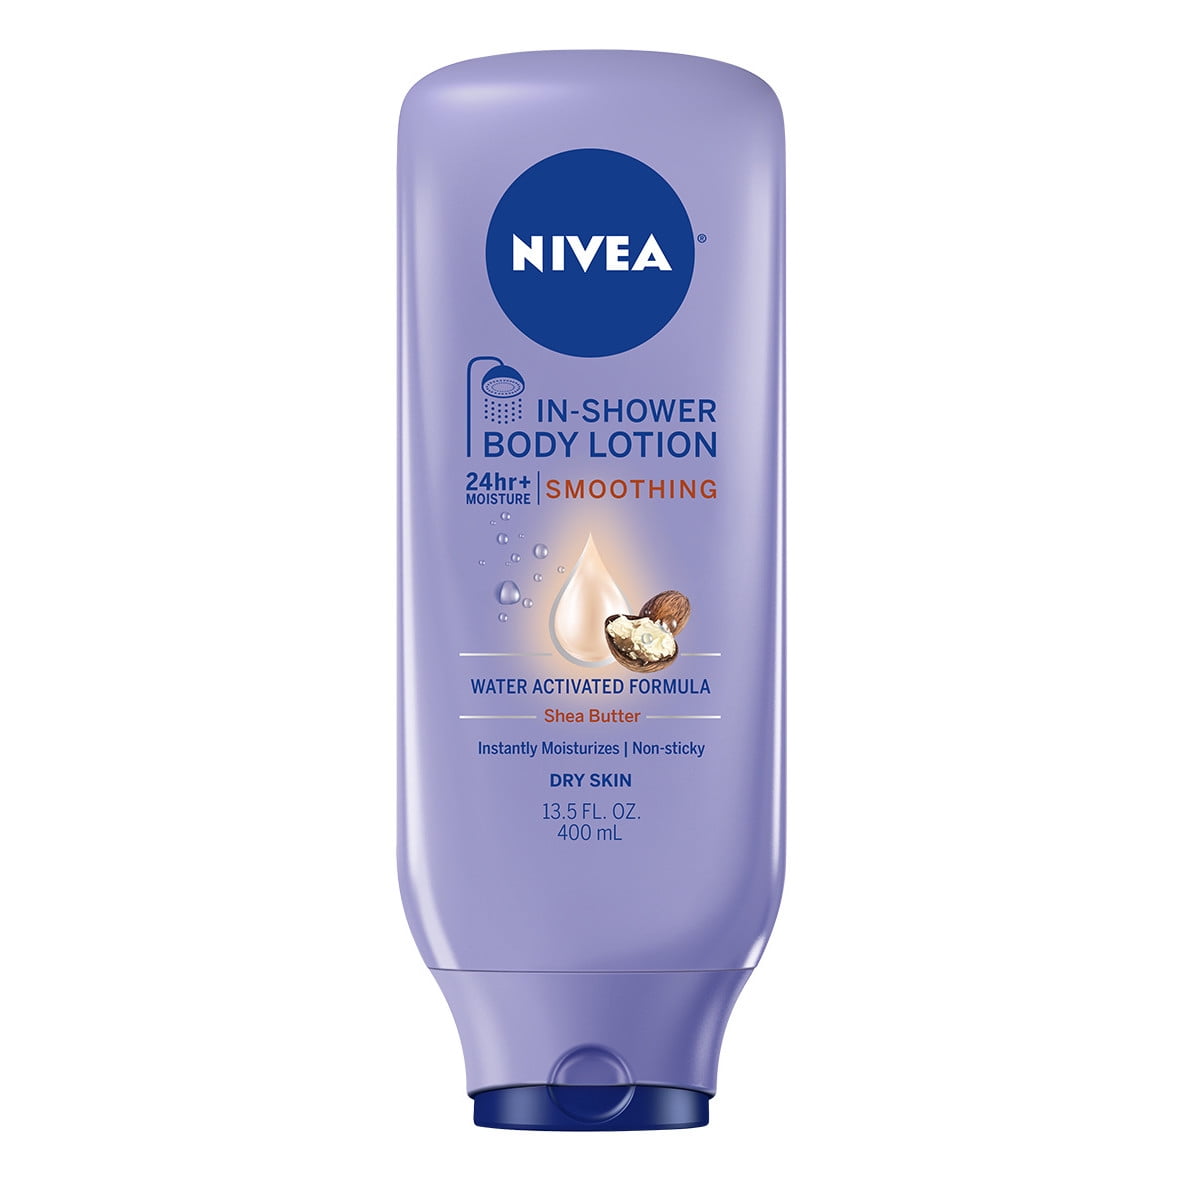 NIVEA In-Shower Smoothing Body Lotion 13.5 fl. oz. -